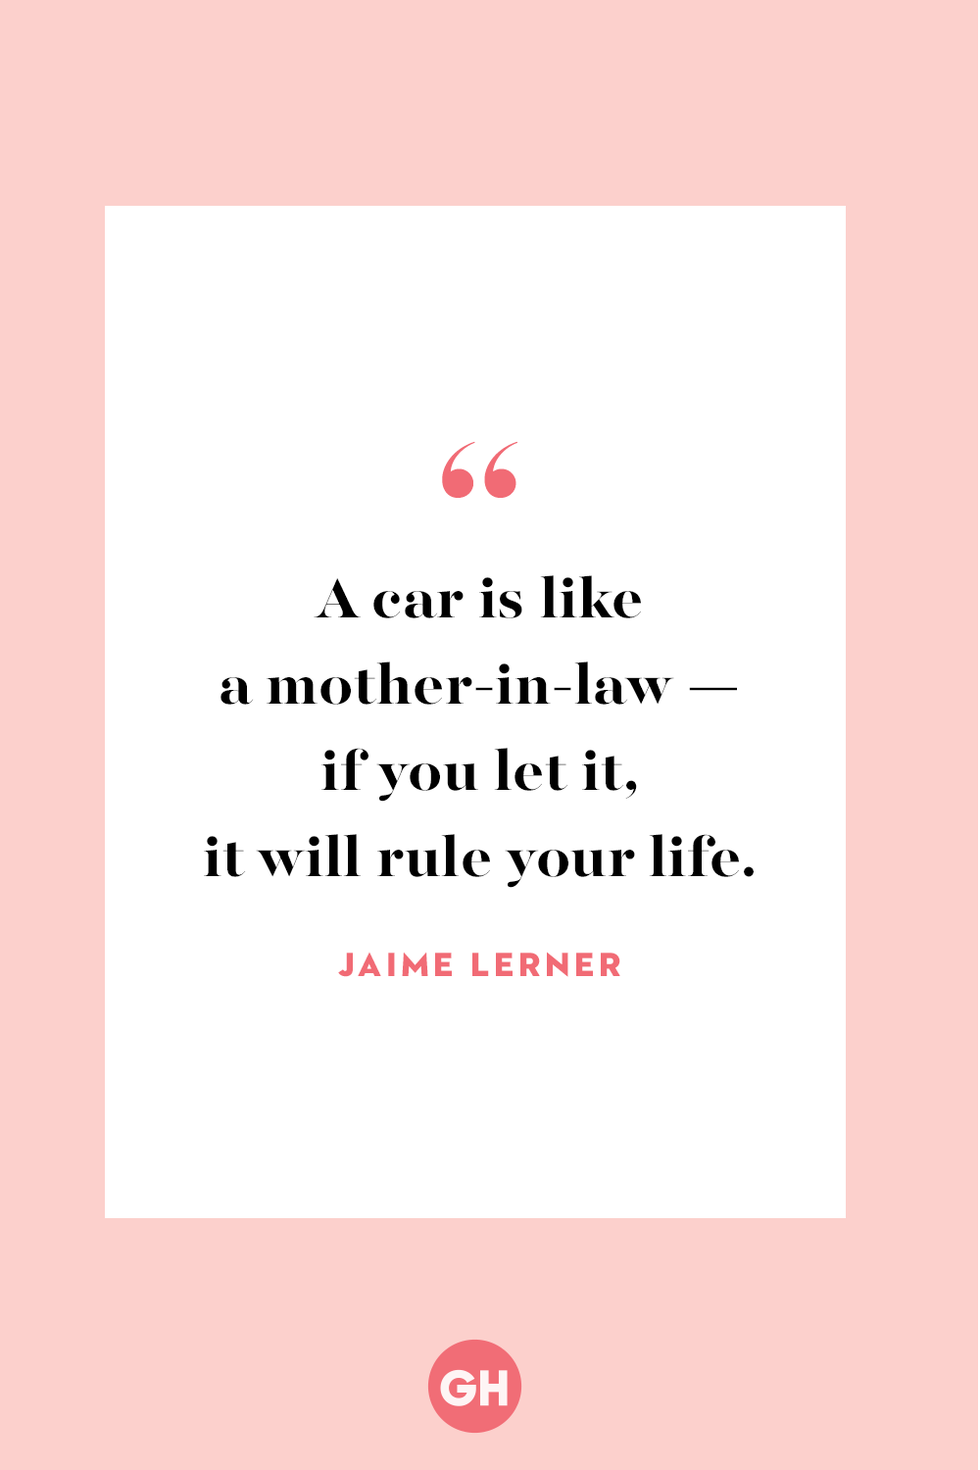 https://hips.hearstapps.com/hmg-prod/images/mother-in-law-quotes-jaime-lerner-640b8beeeb0d9.png?crop=1xw:1xh;center,top&resize=980:*